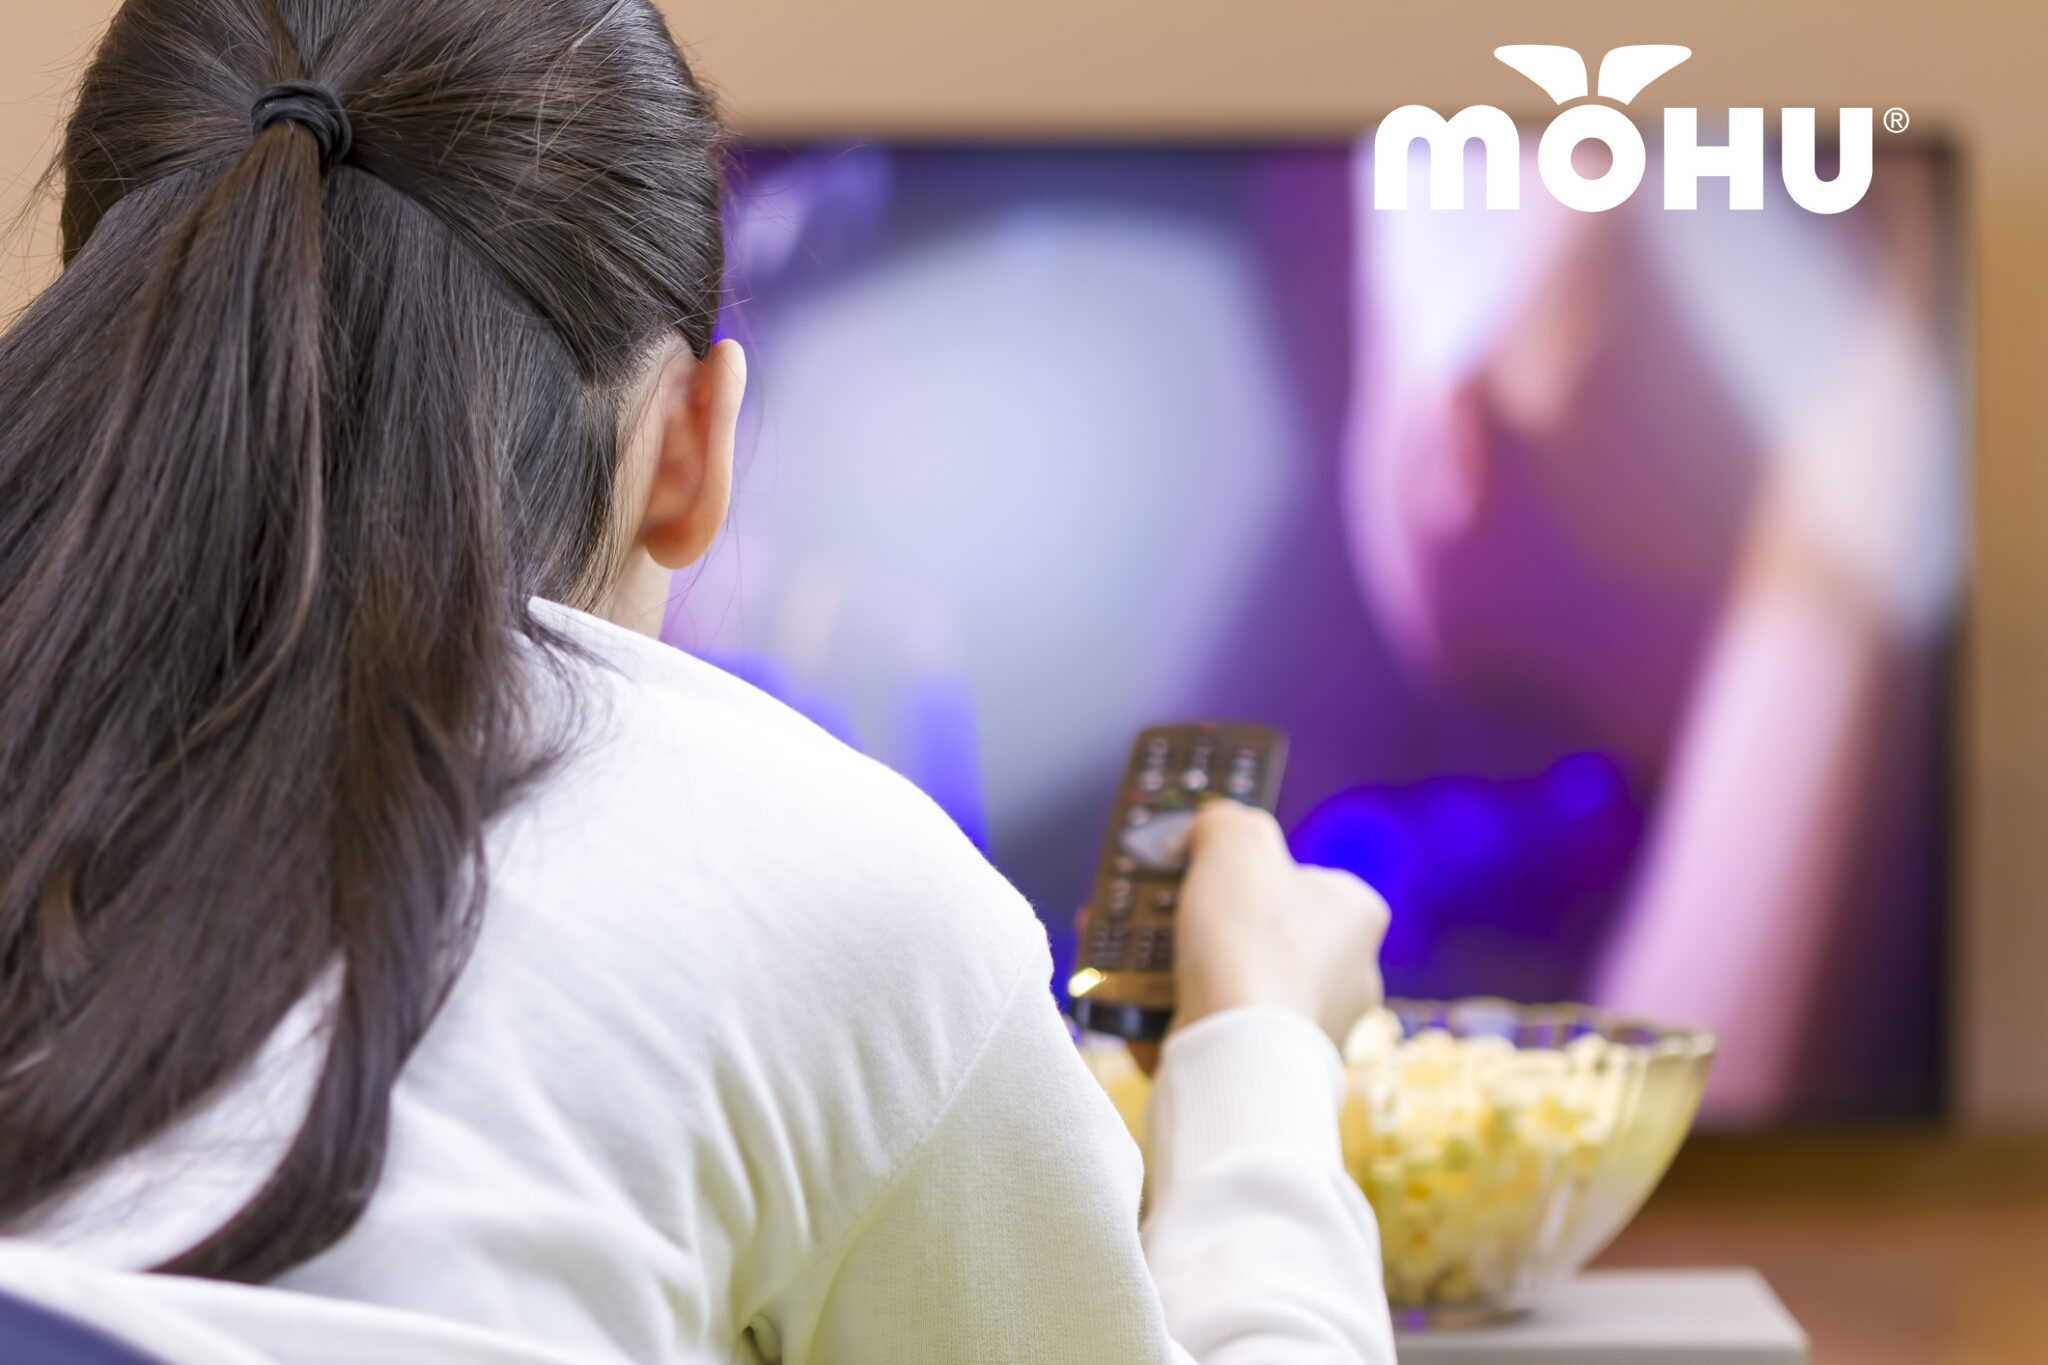 Girl watching TV with a bowl of popcorn and a mohu logo